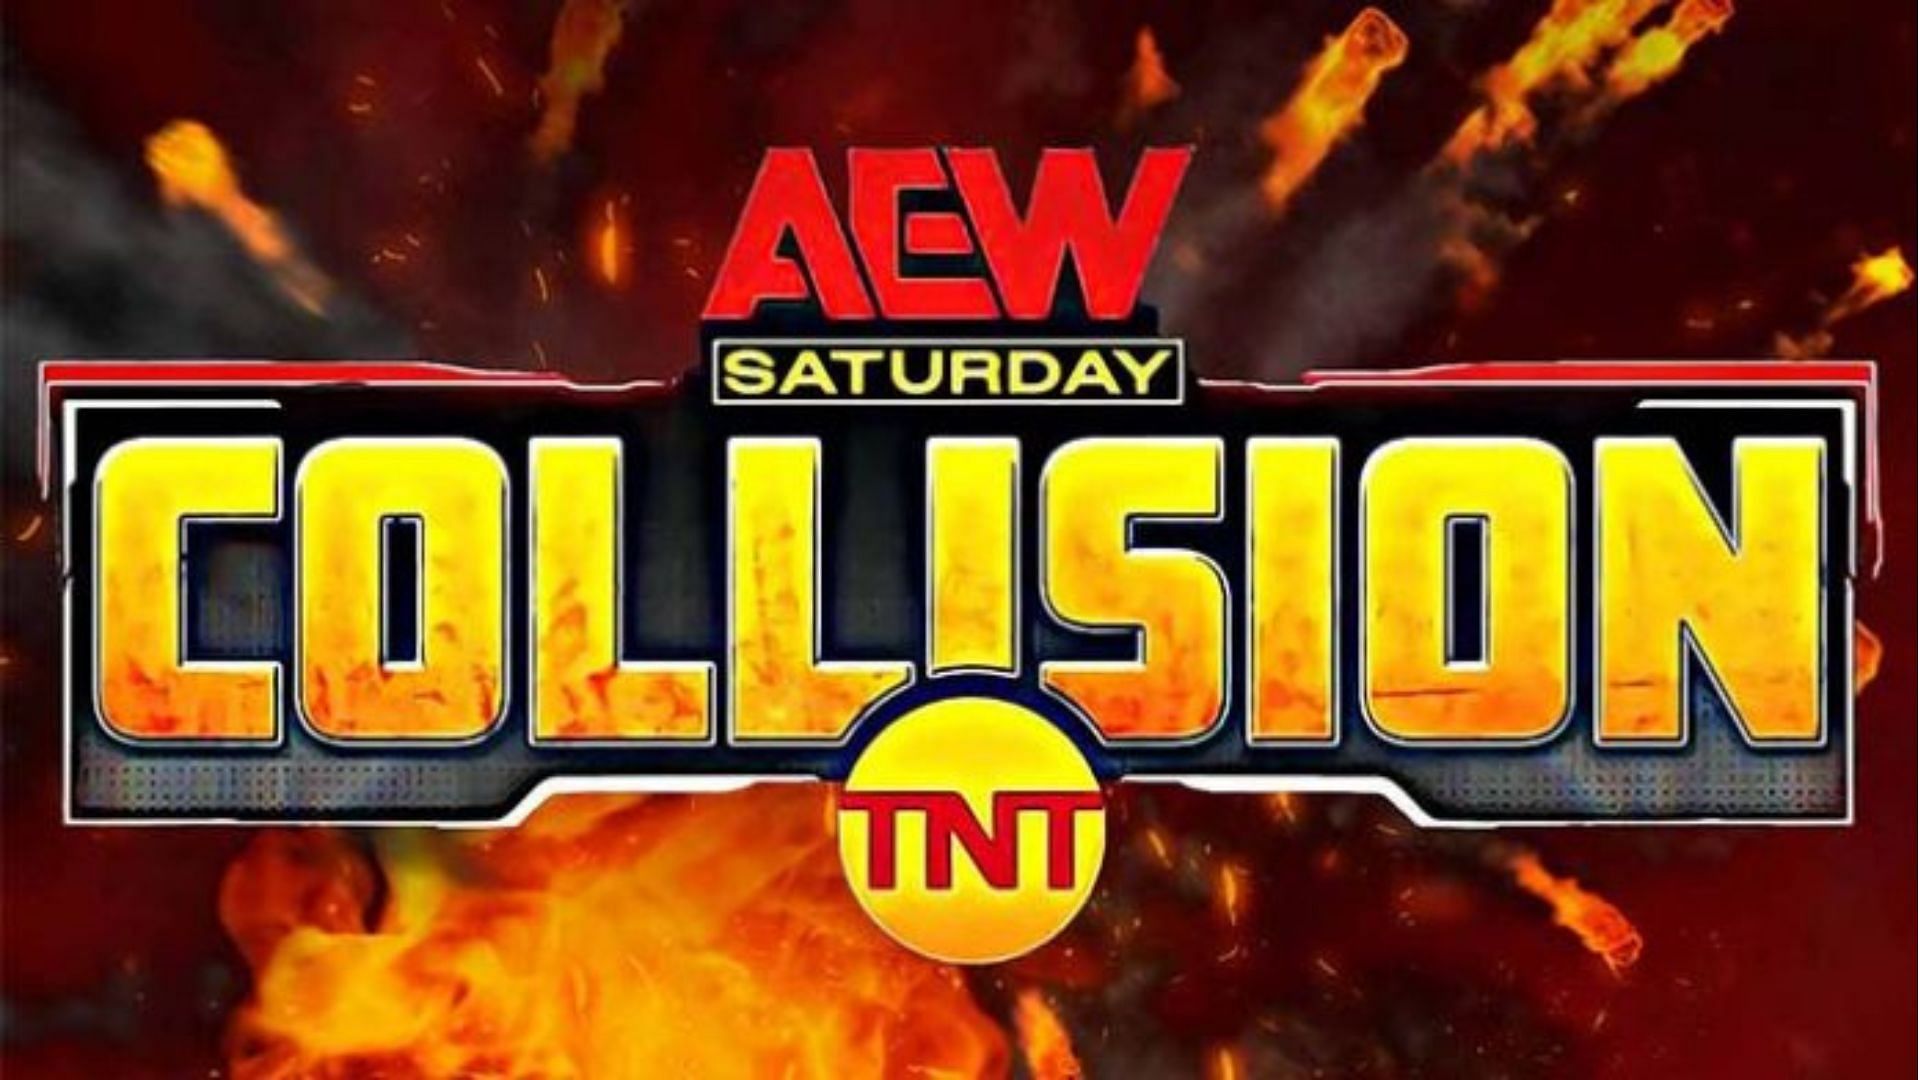 AEW Collision has its announce team locked in!